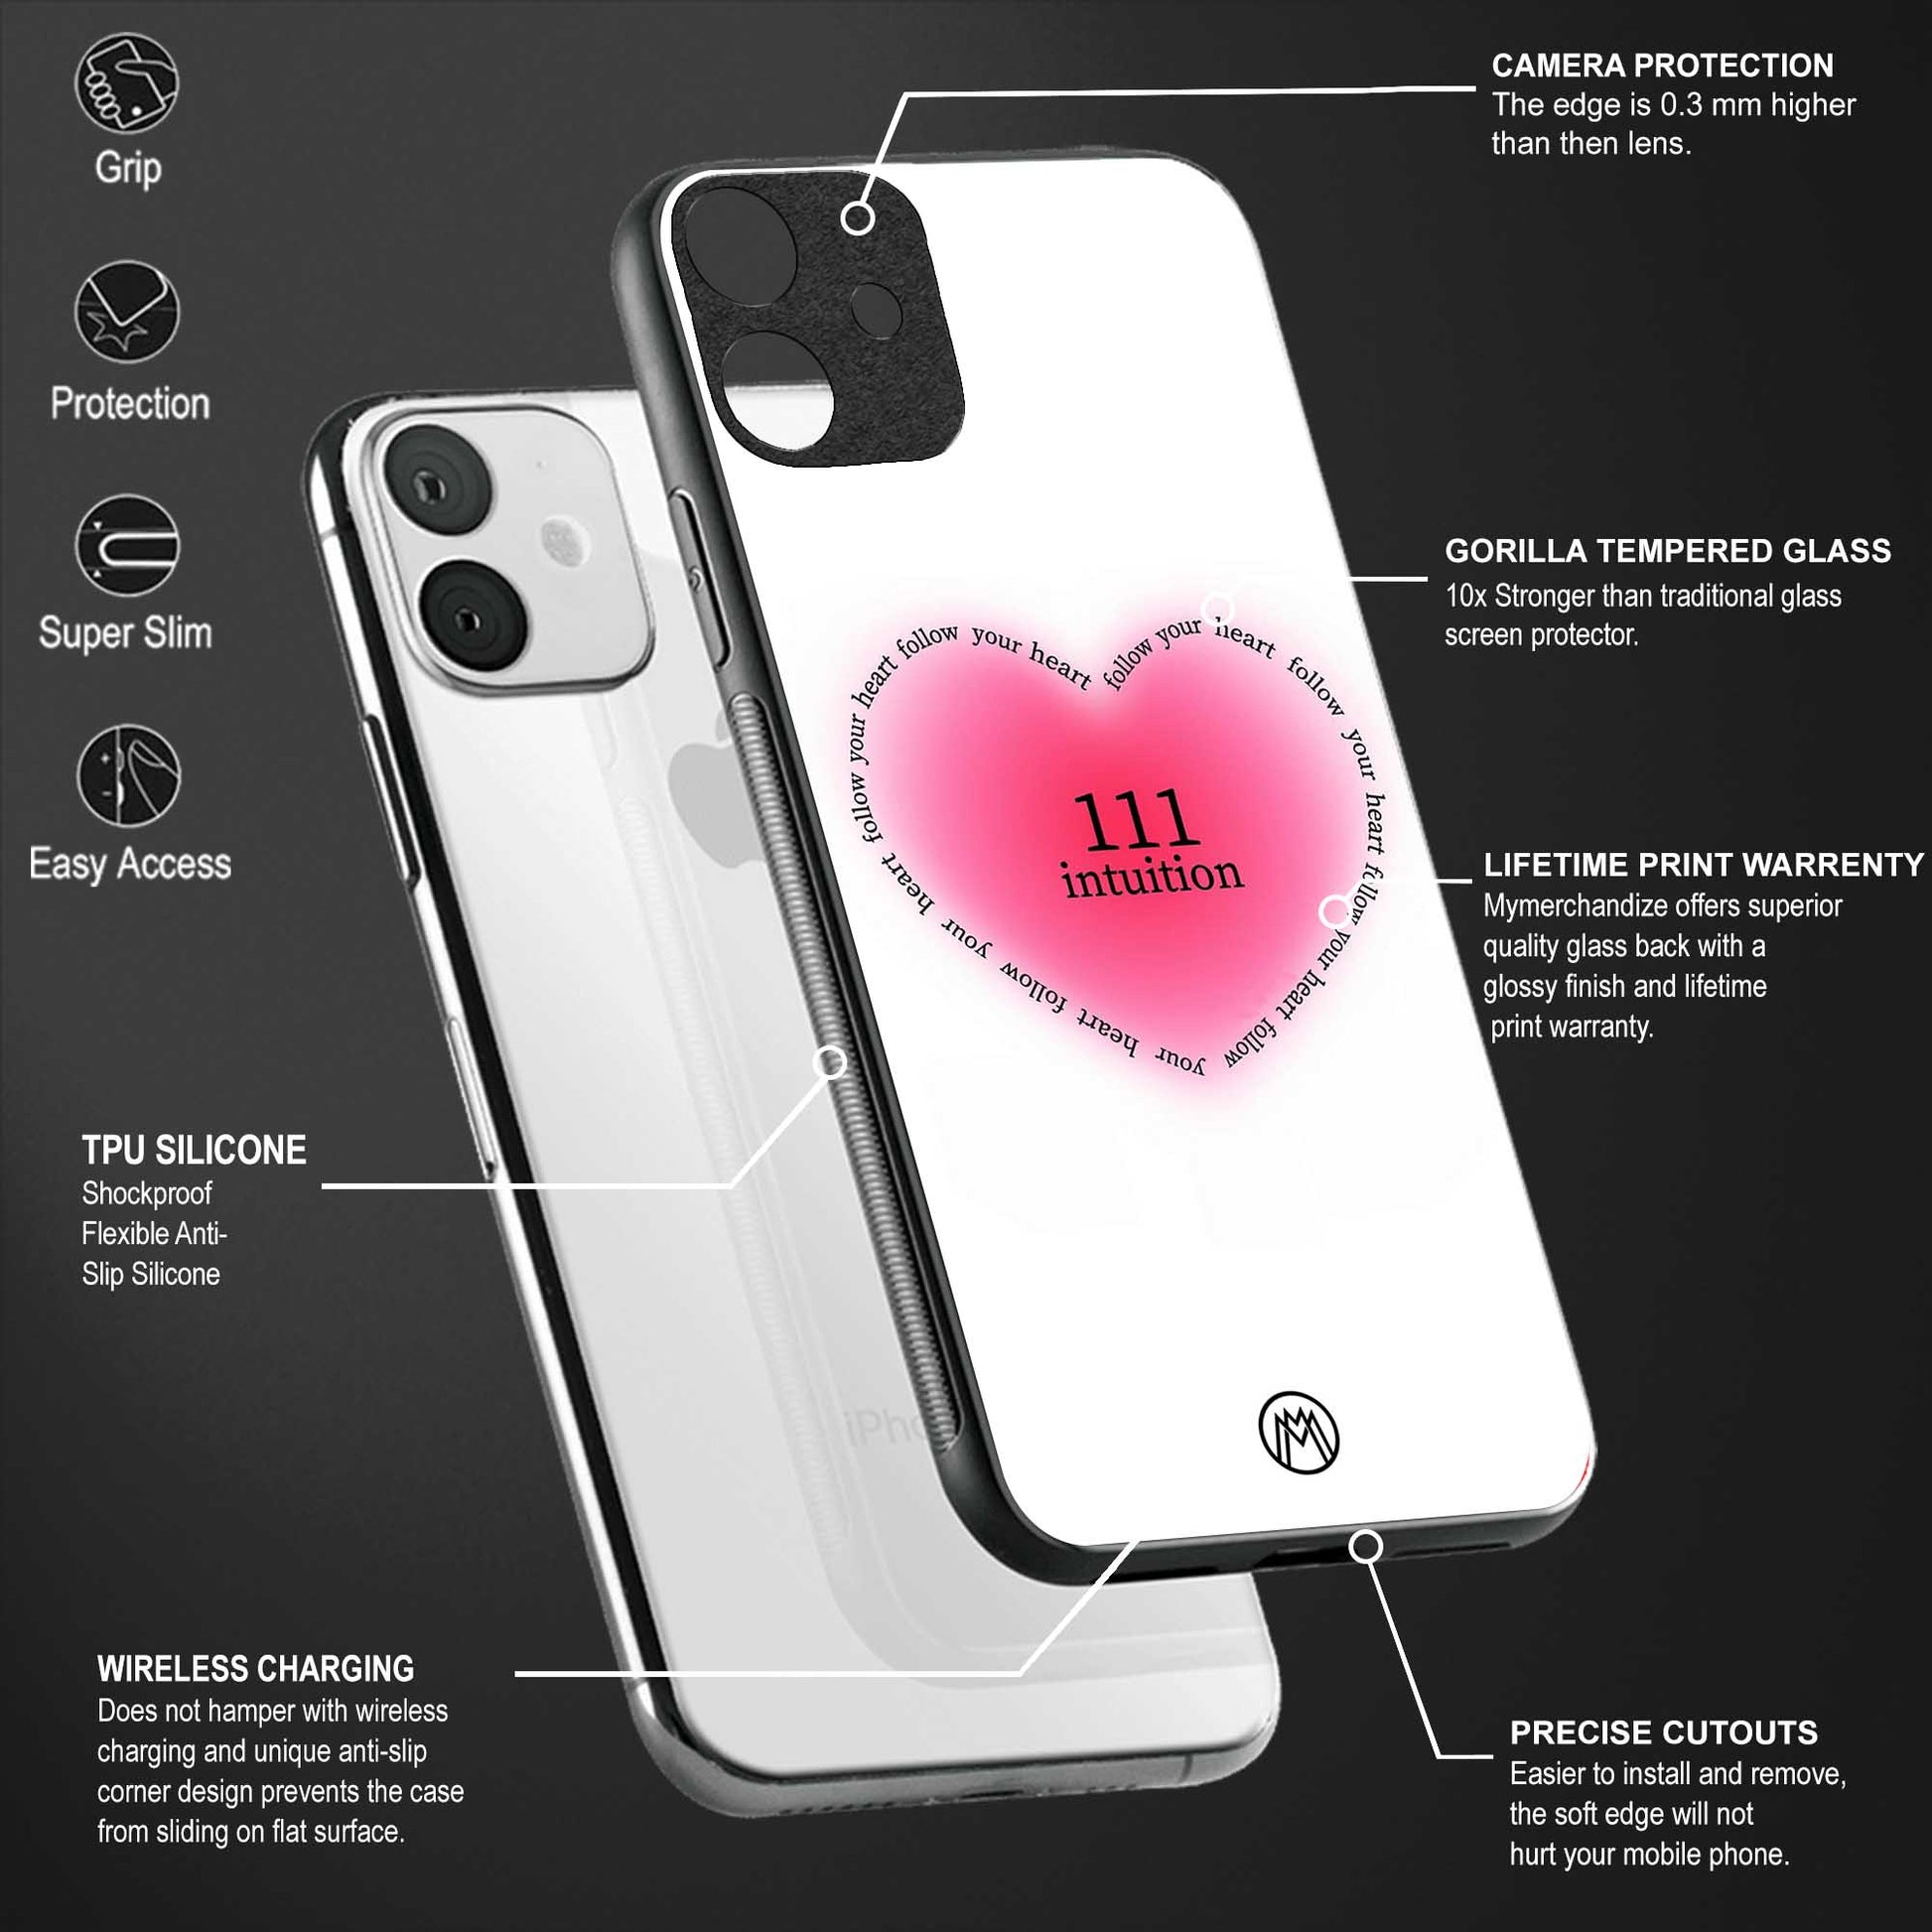 111 intuition back phone cover | glass case for samsung galaxy a73 5g